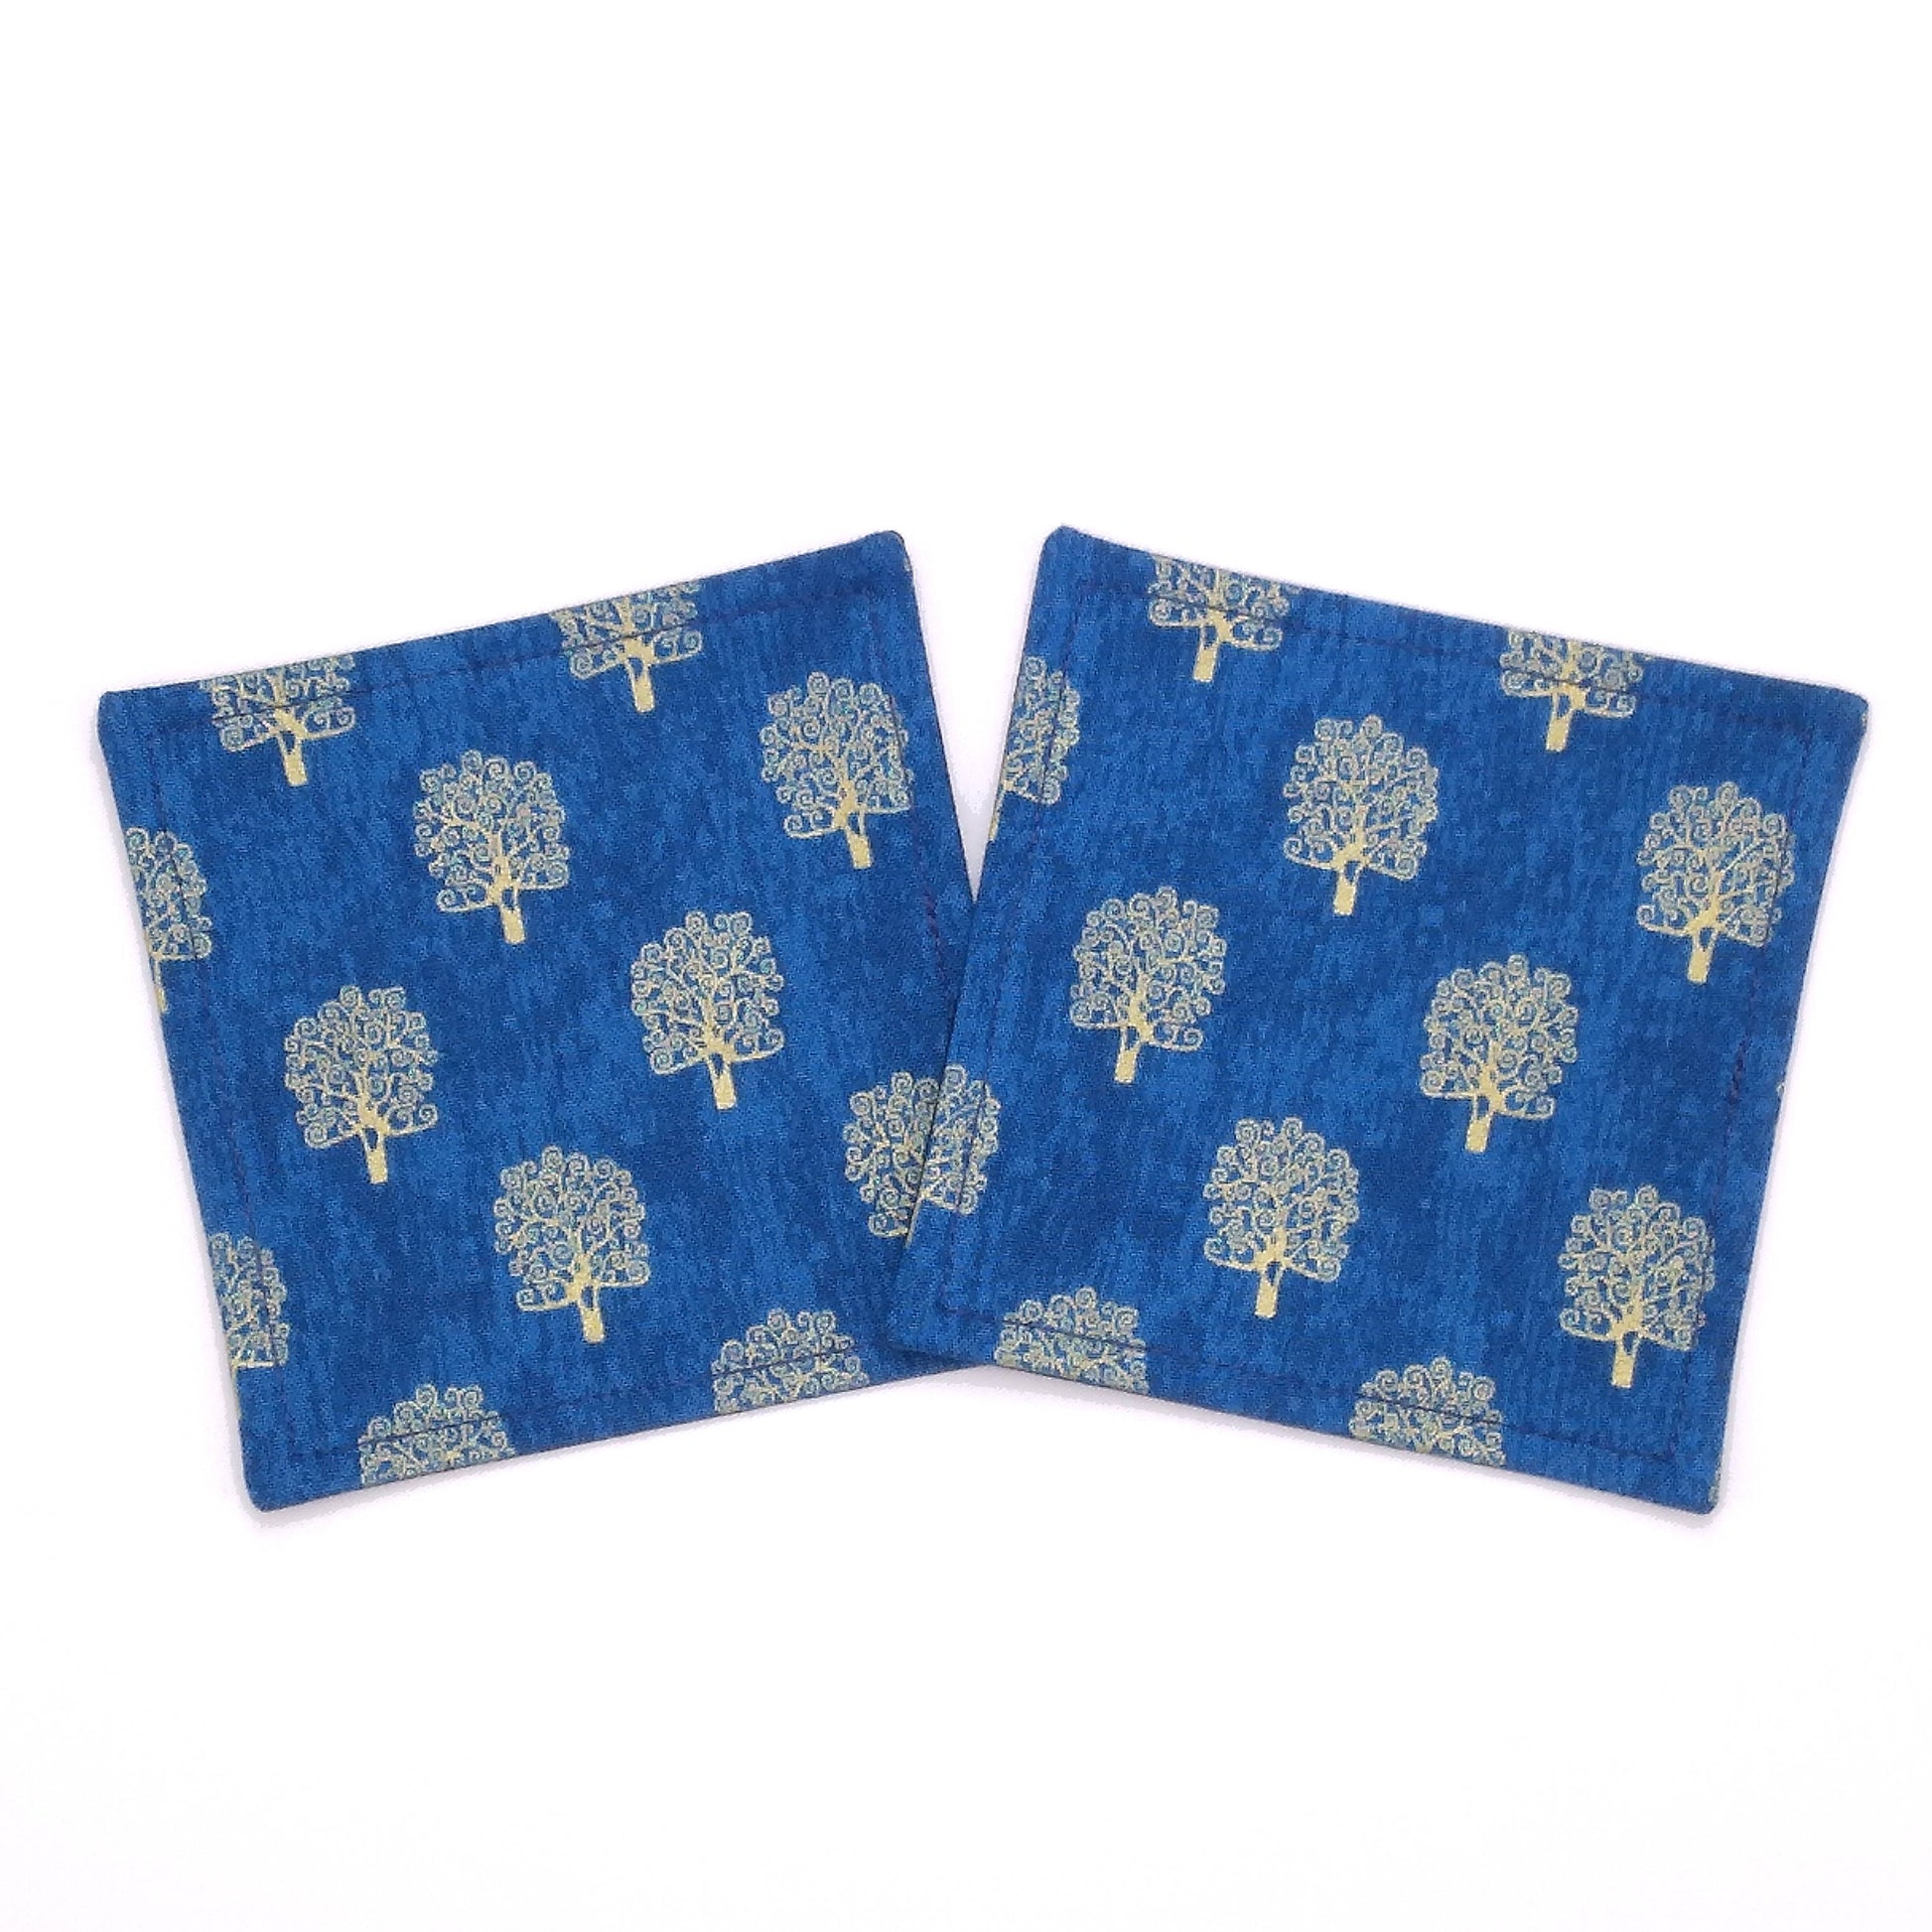 Square coasters with gold colour trees design on blue background